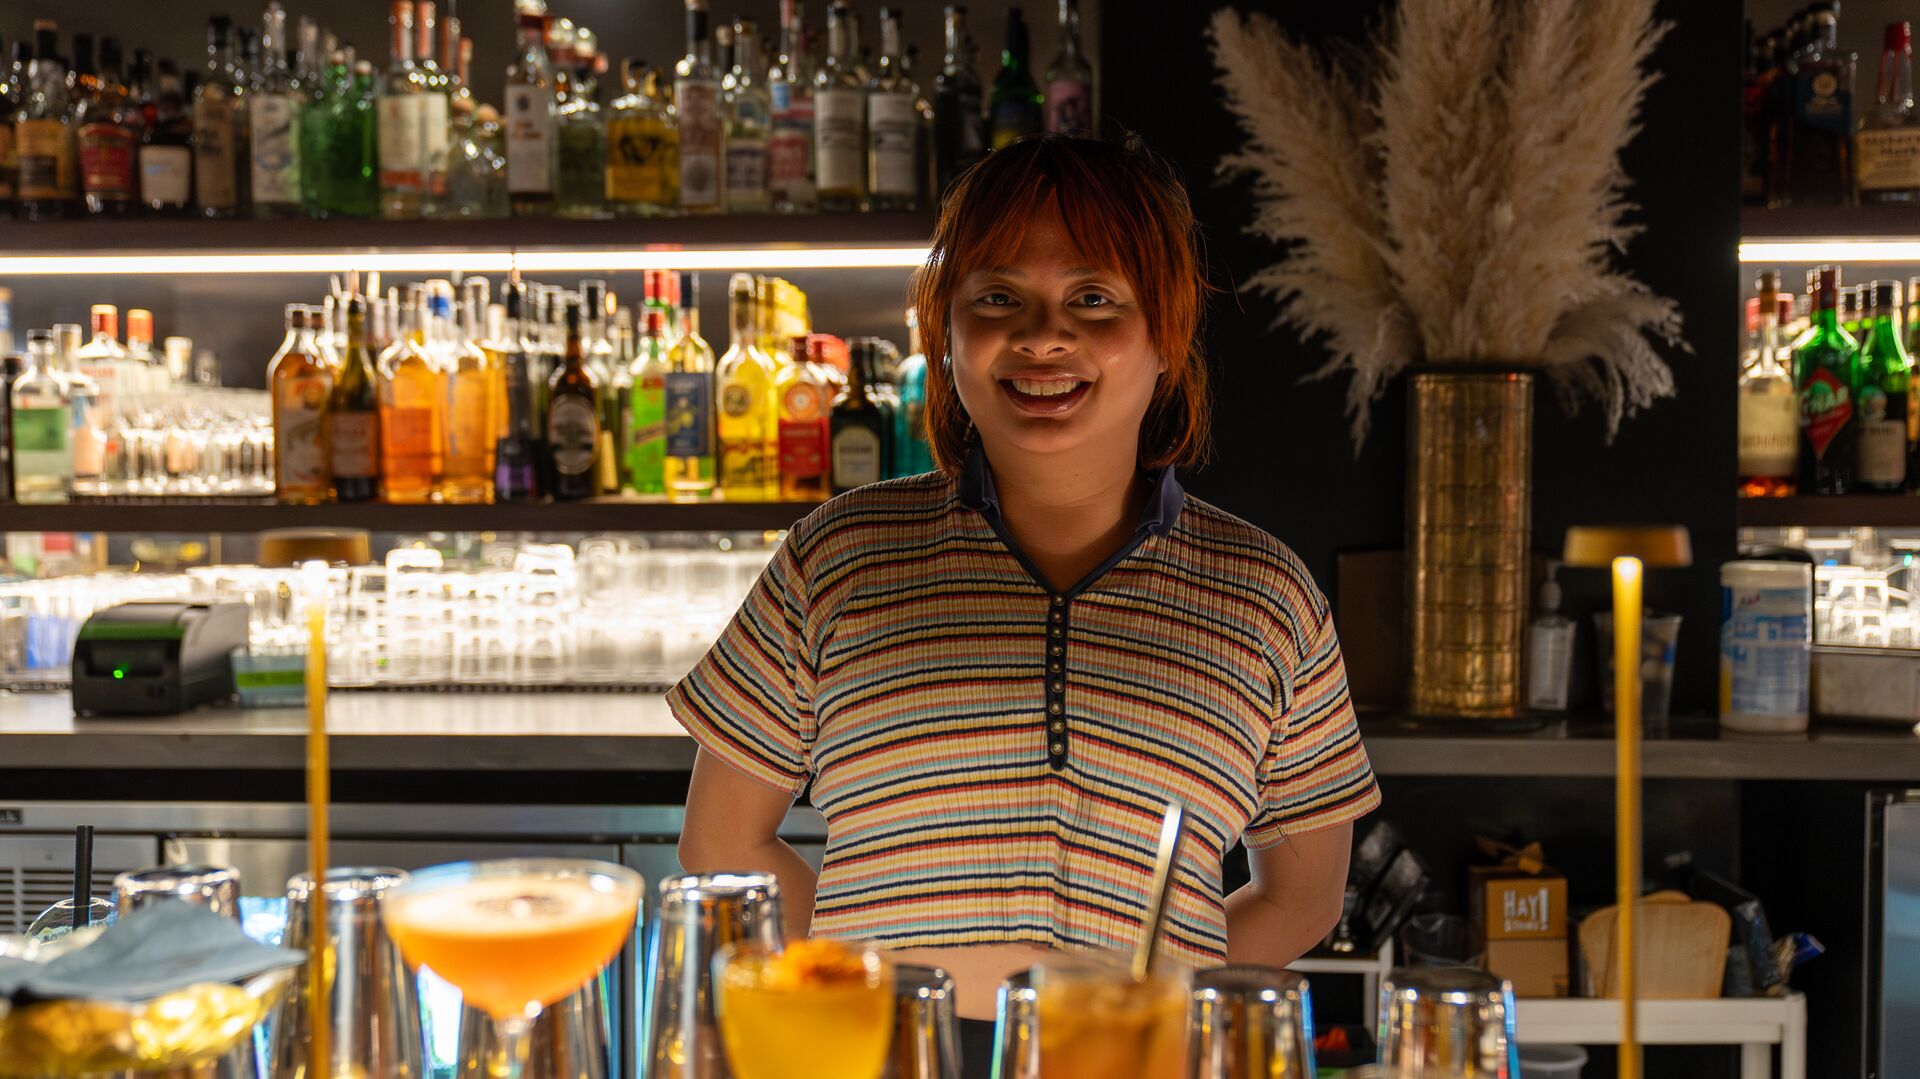 Fionna Gemzon mixes drinks behind the bar of None of the Above.